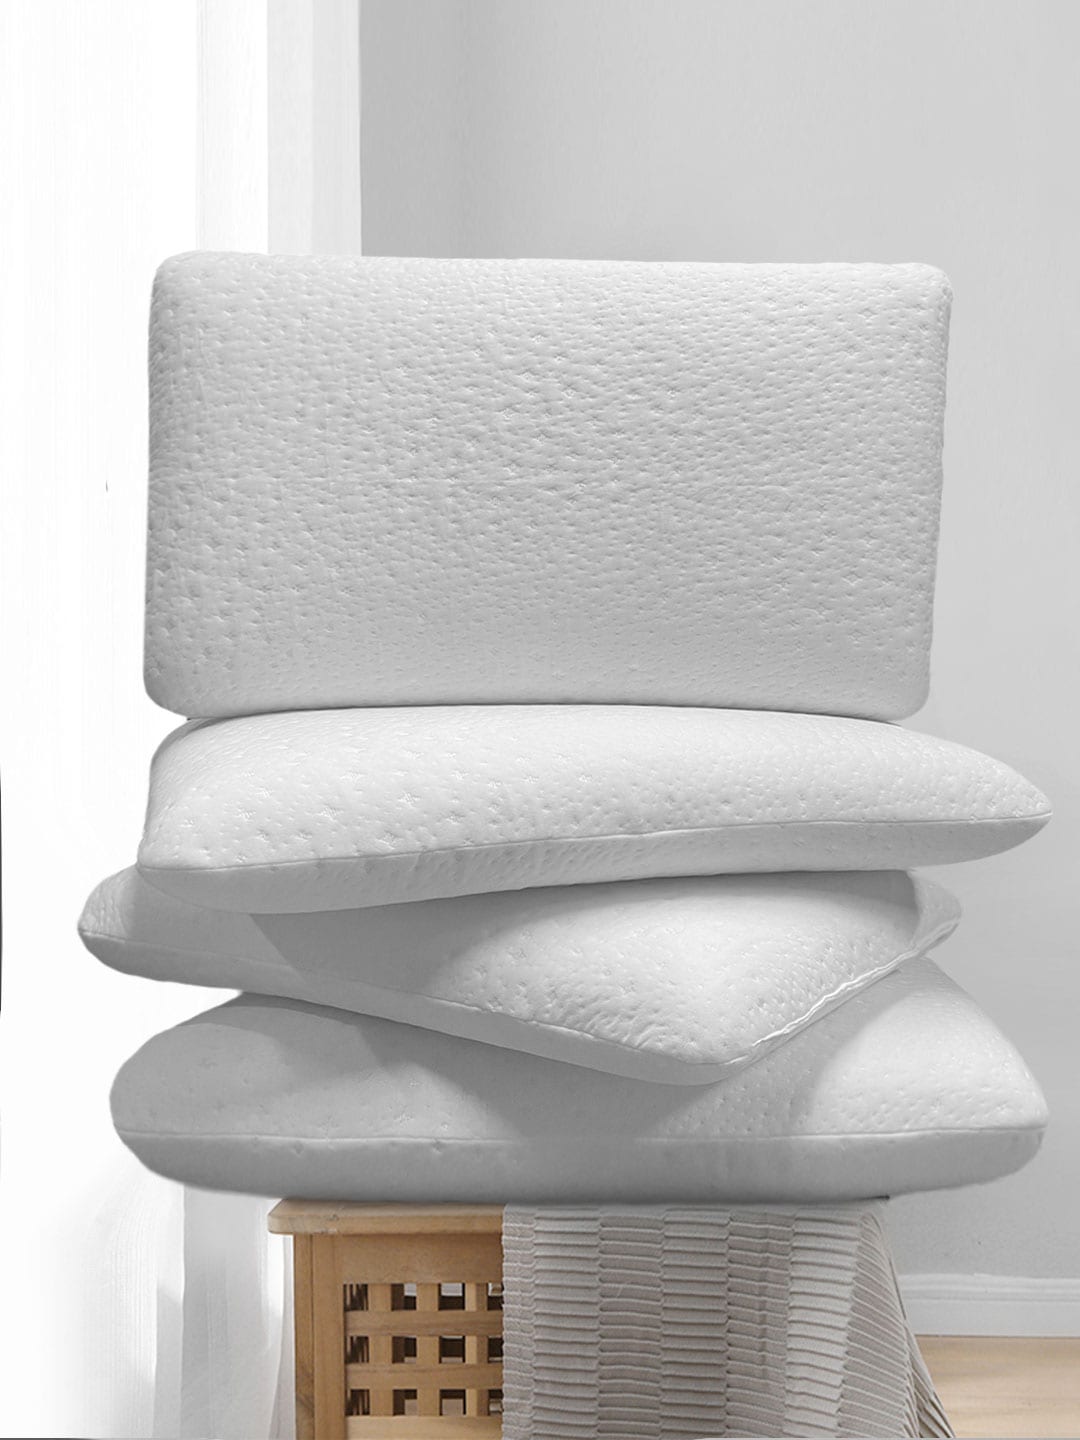 Aura Set Of 4 White Solid Memory Foam Pillow Price in India